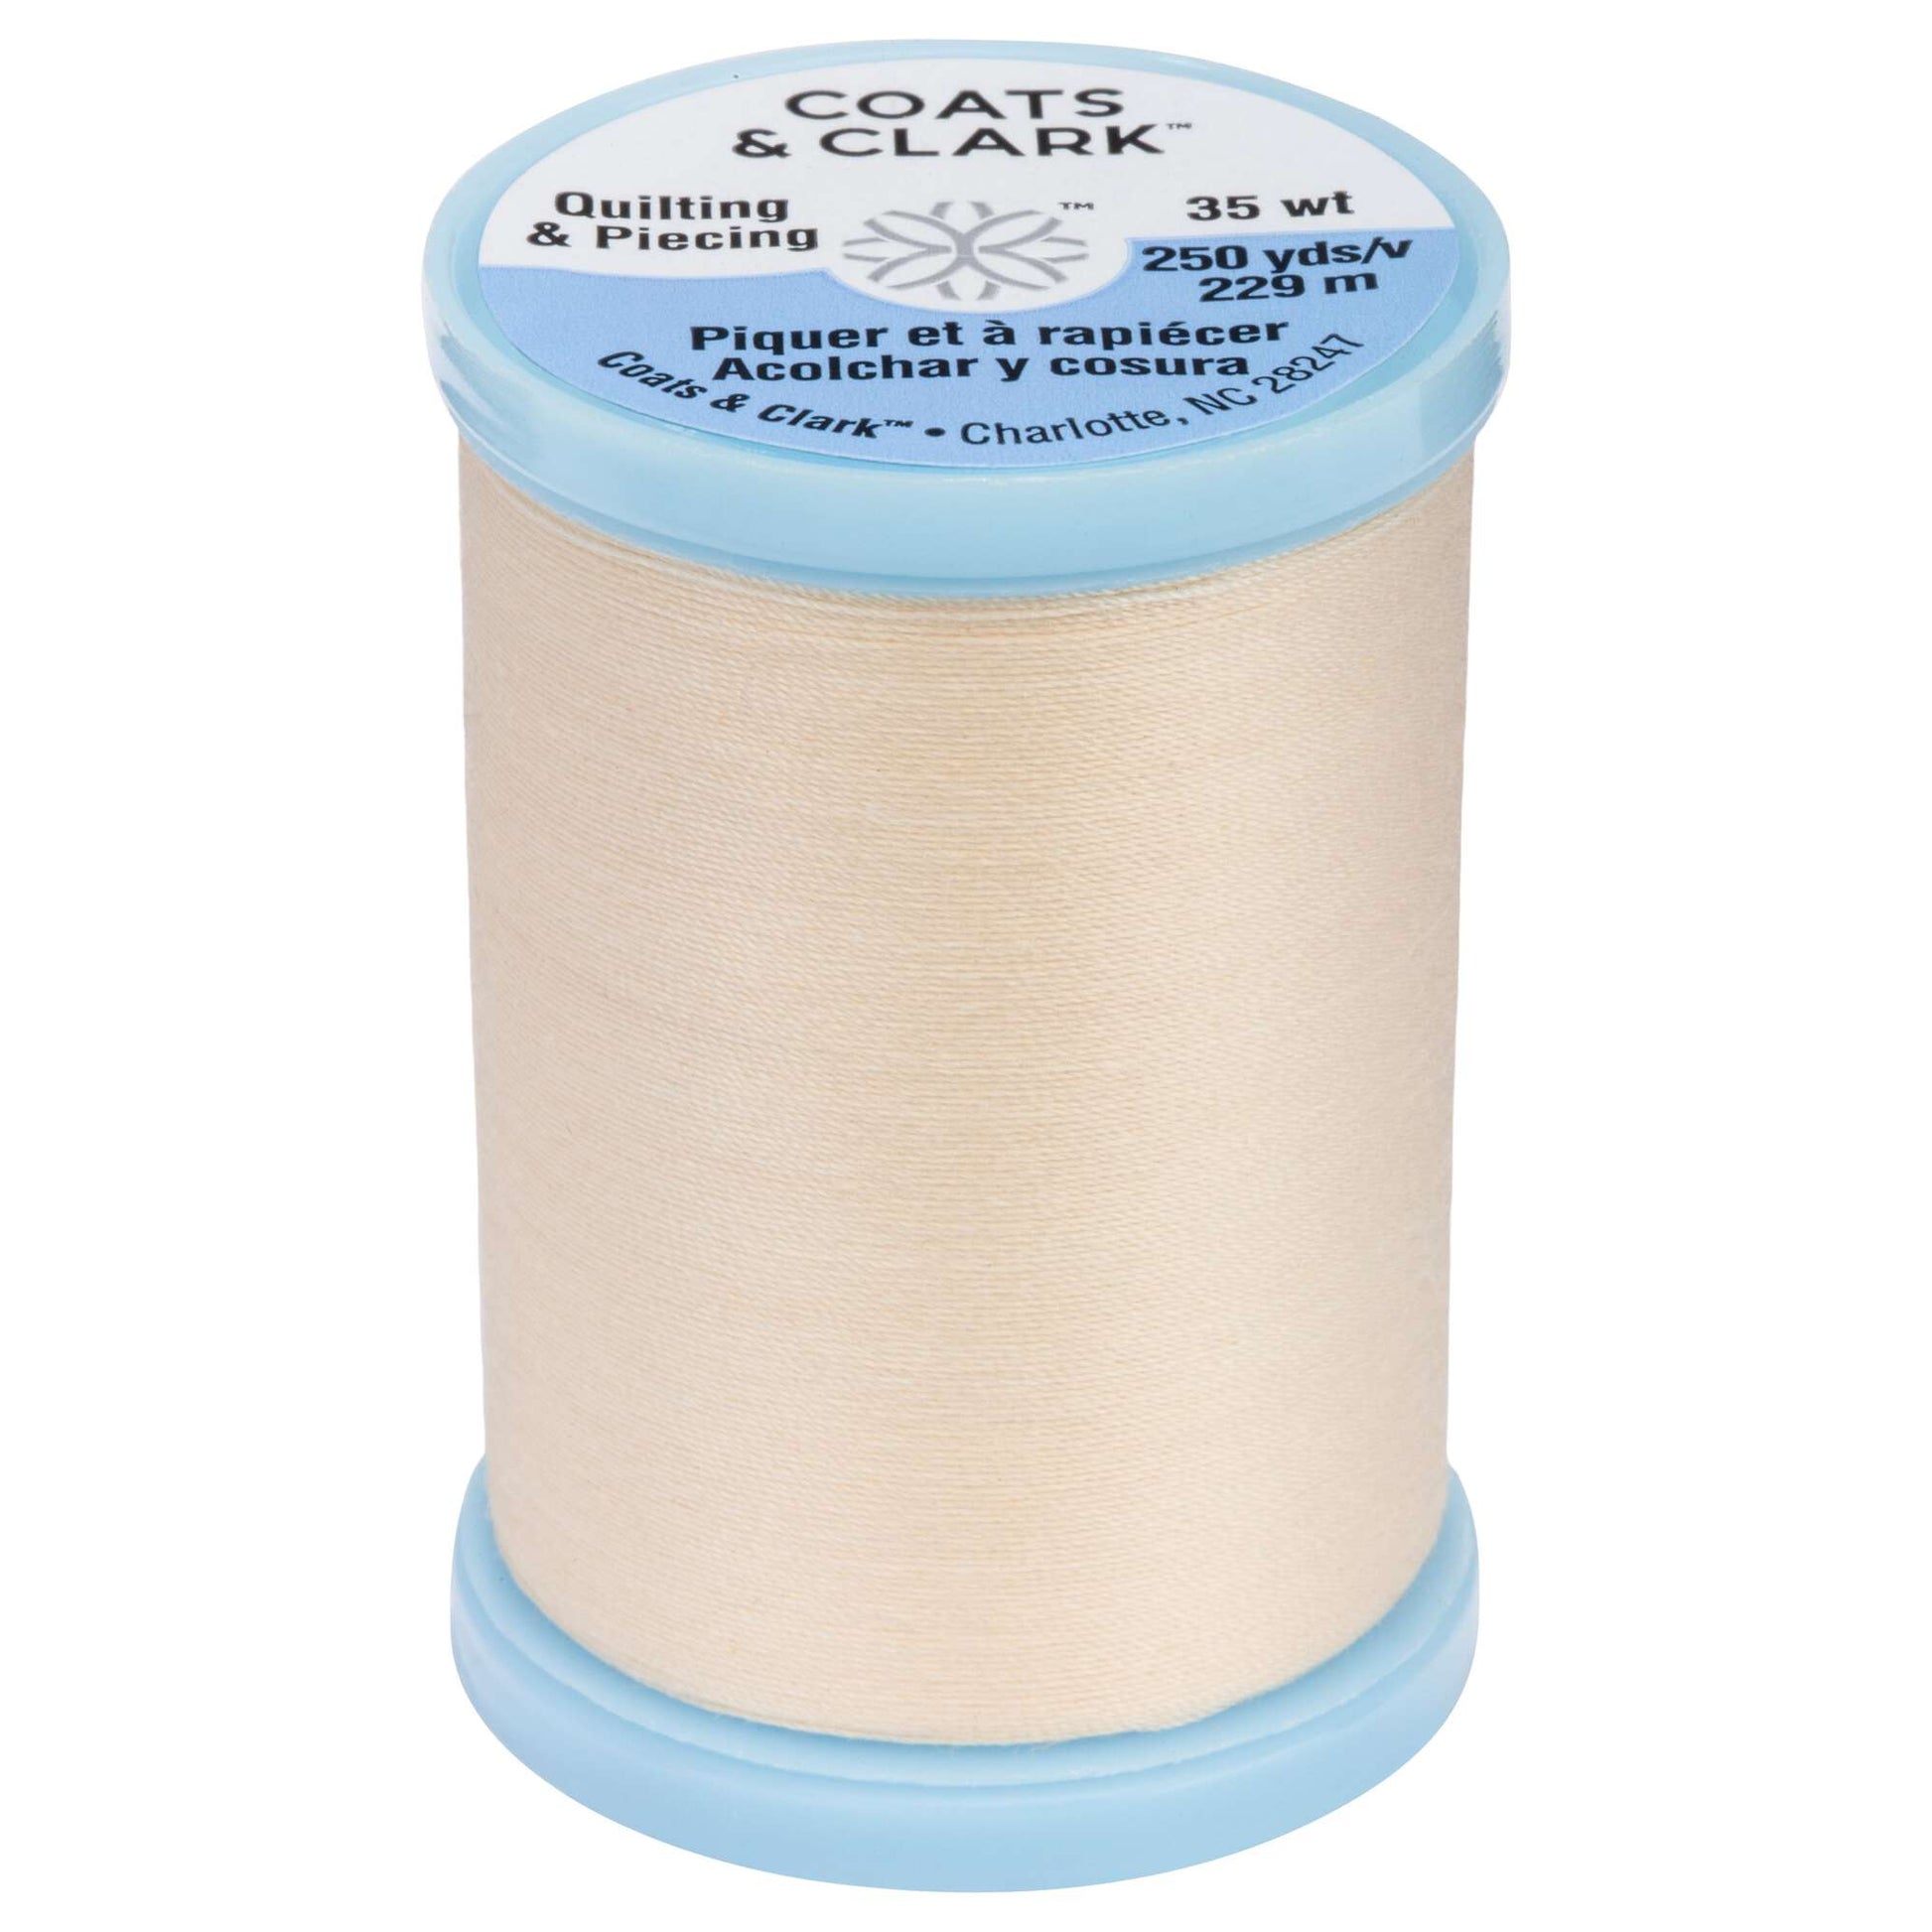 Coats Cotton Covered S925 Quilting & Piecing Thread - Tex 30 - 250